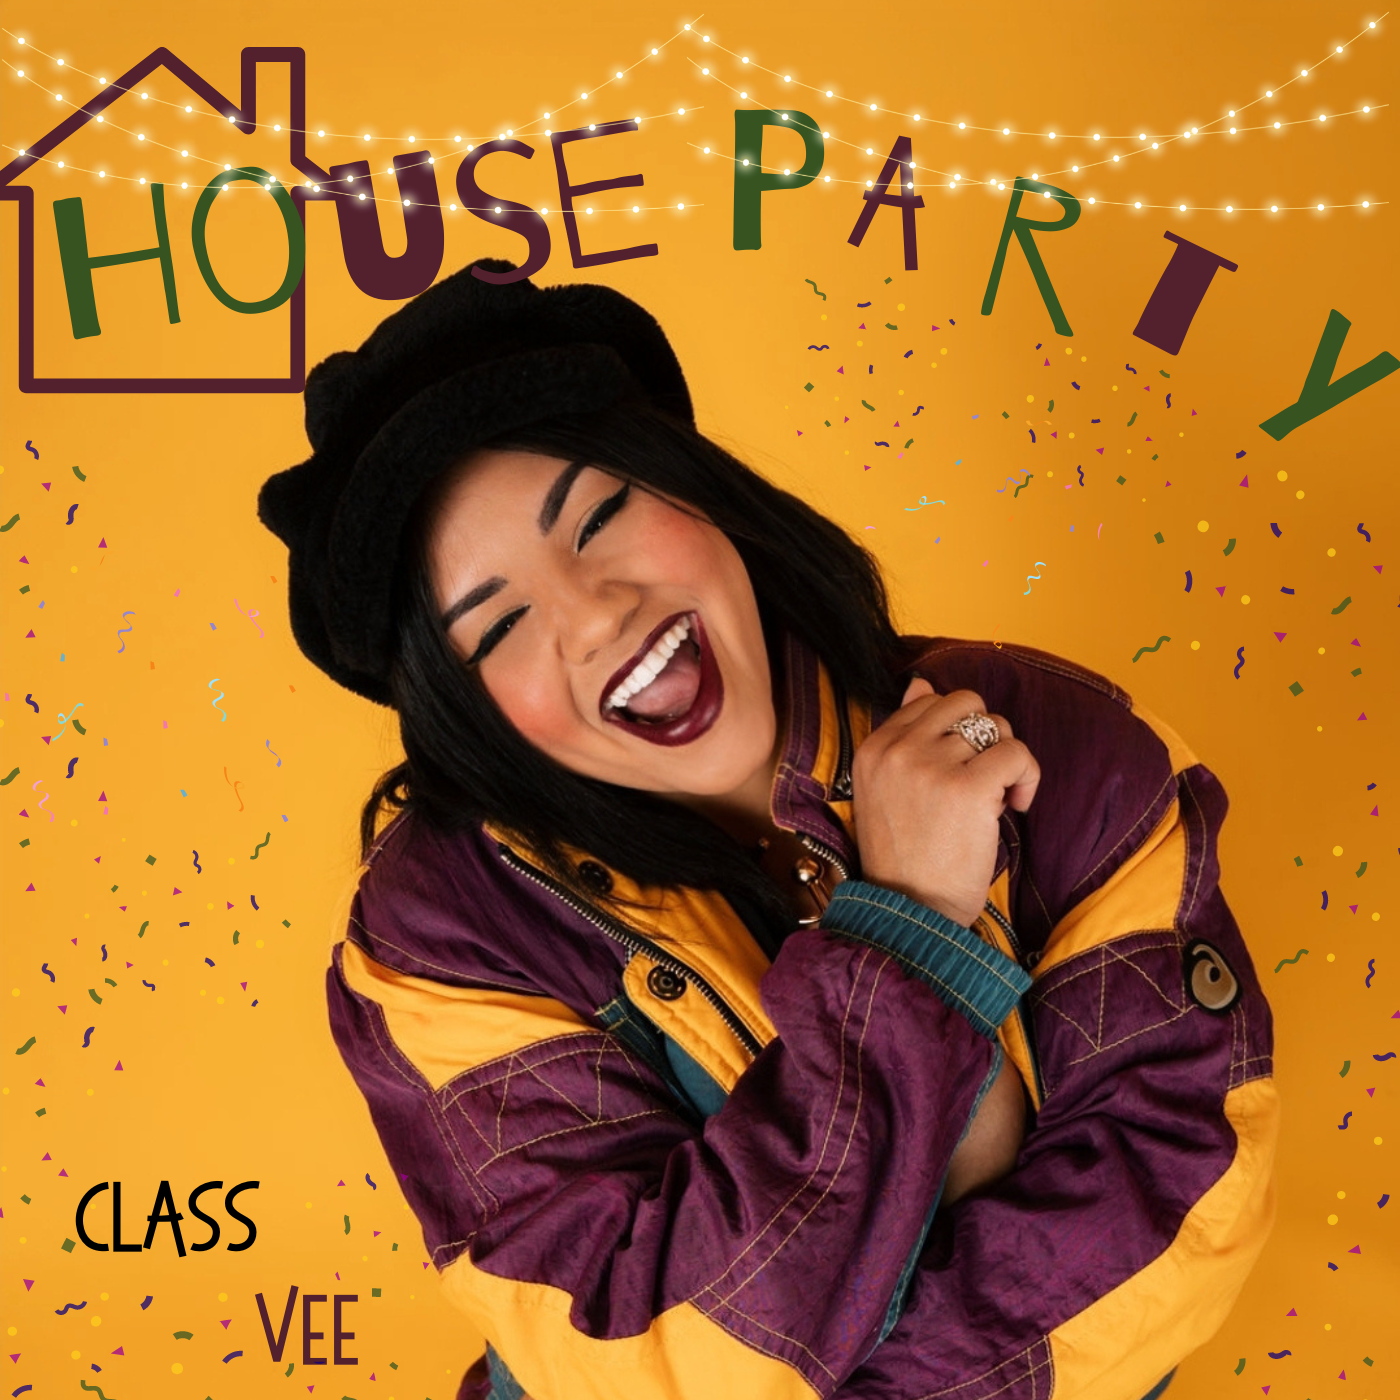 Tampa’s premier hip-pop nostalgist Class Vee sent an invitation you won’t want to ignore